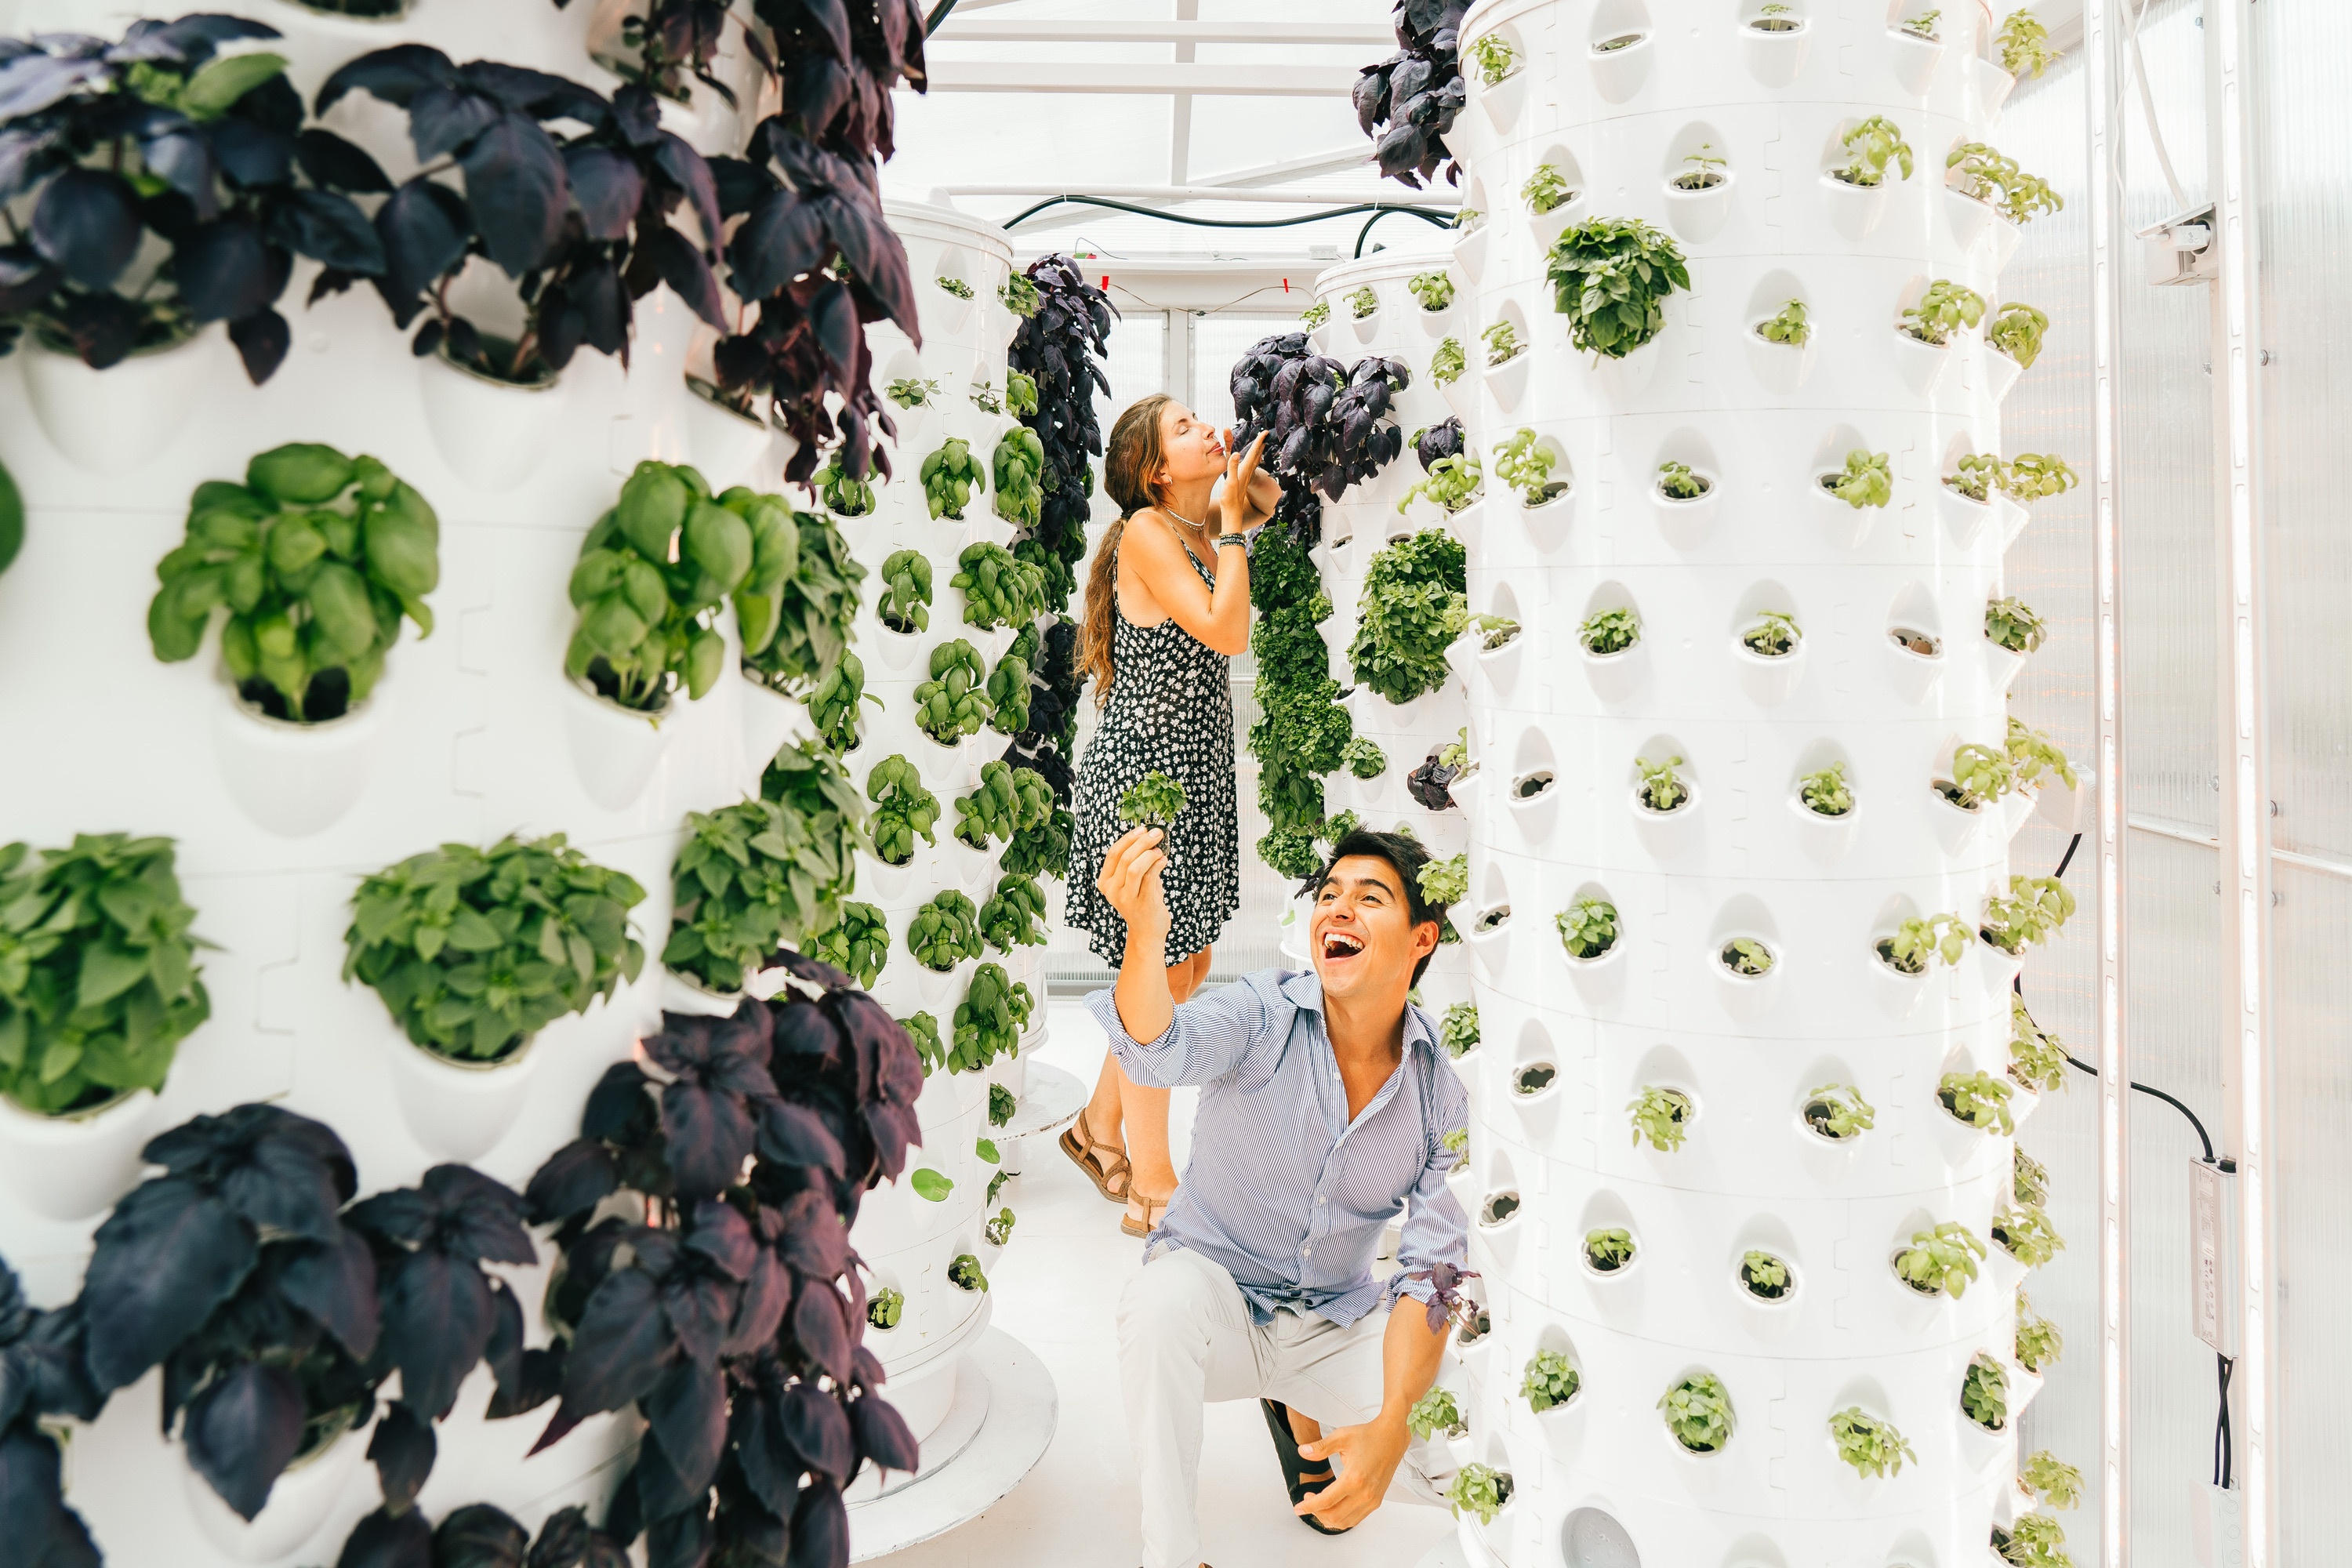 cofounders inside vertical farming experience in lisbon